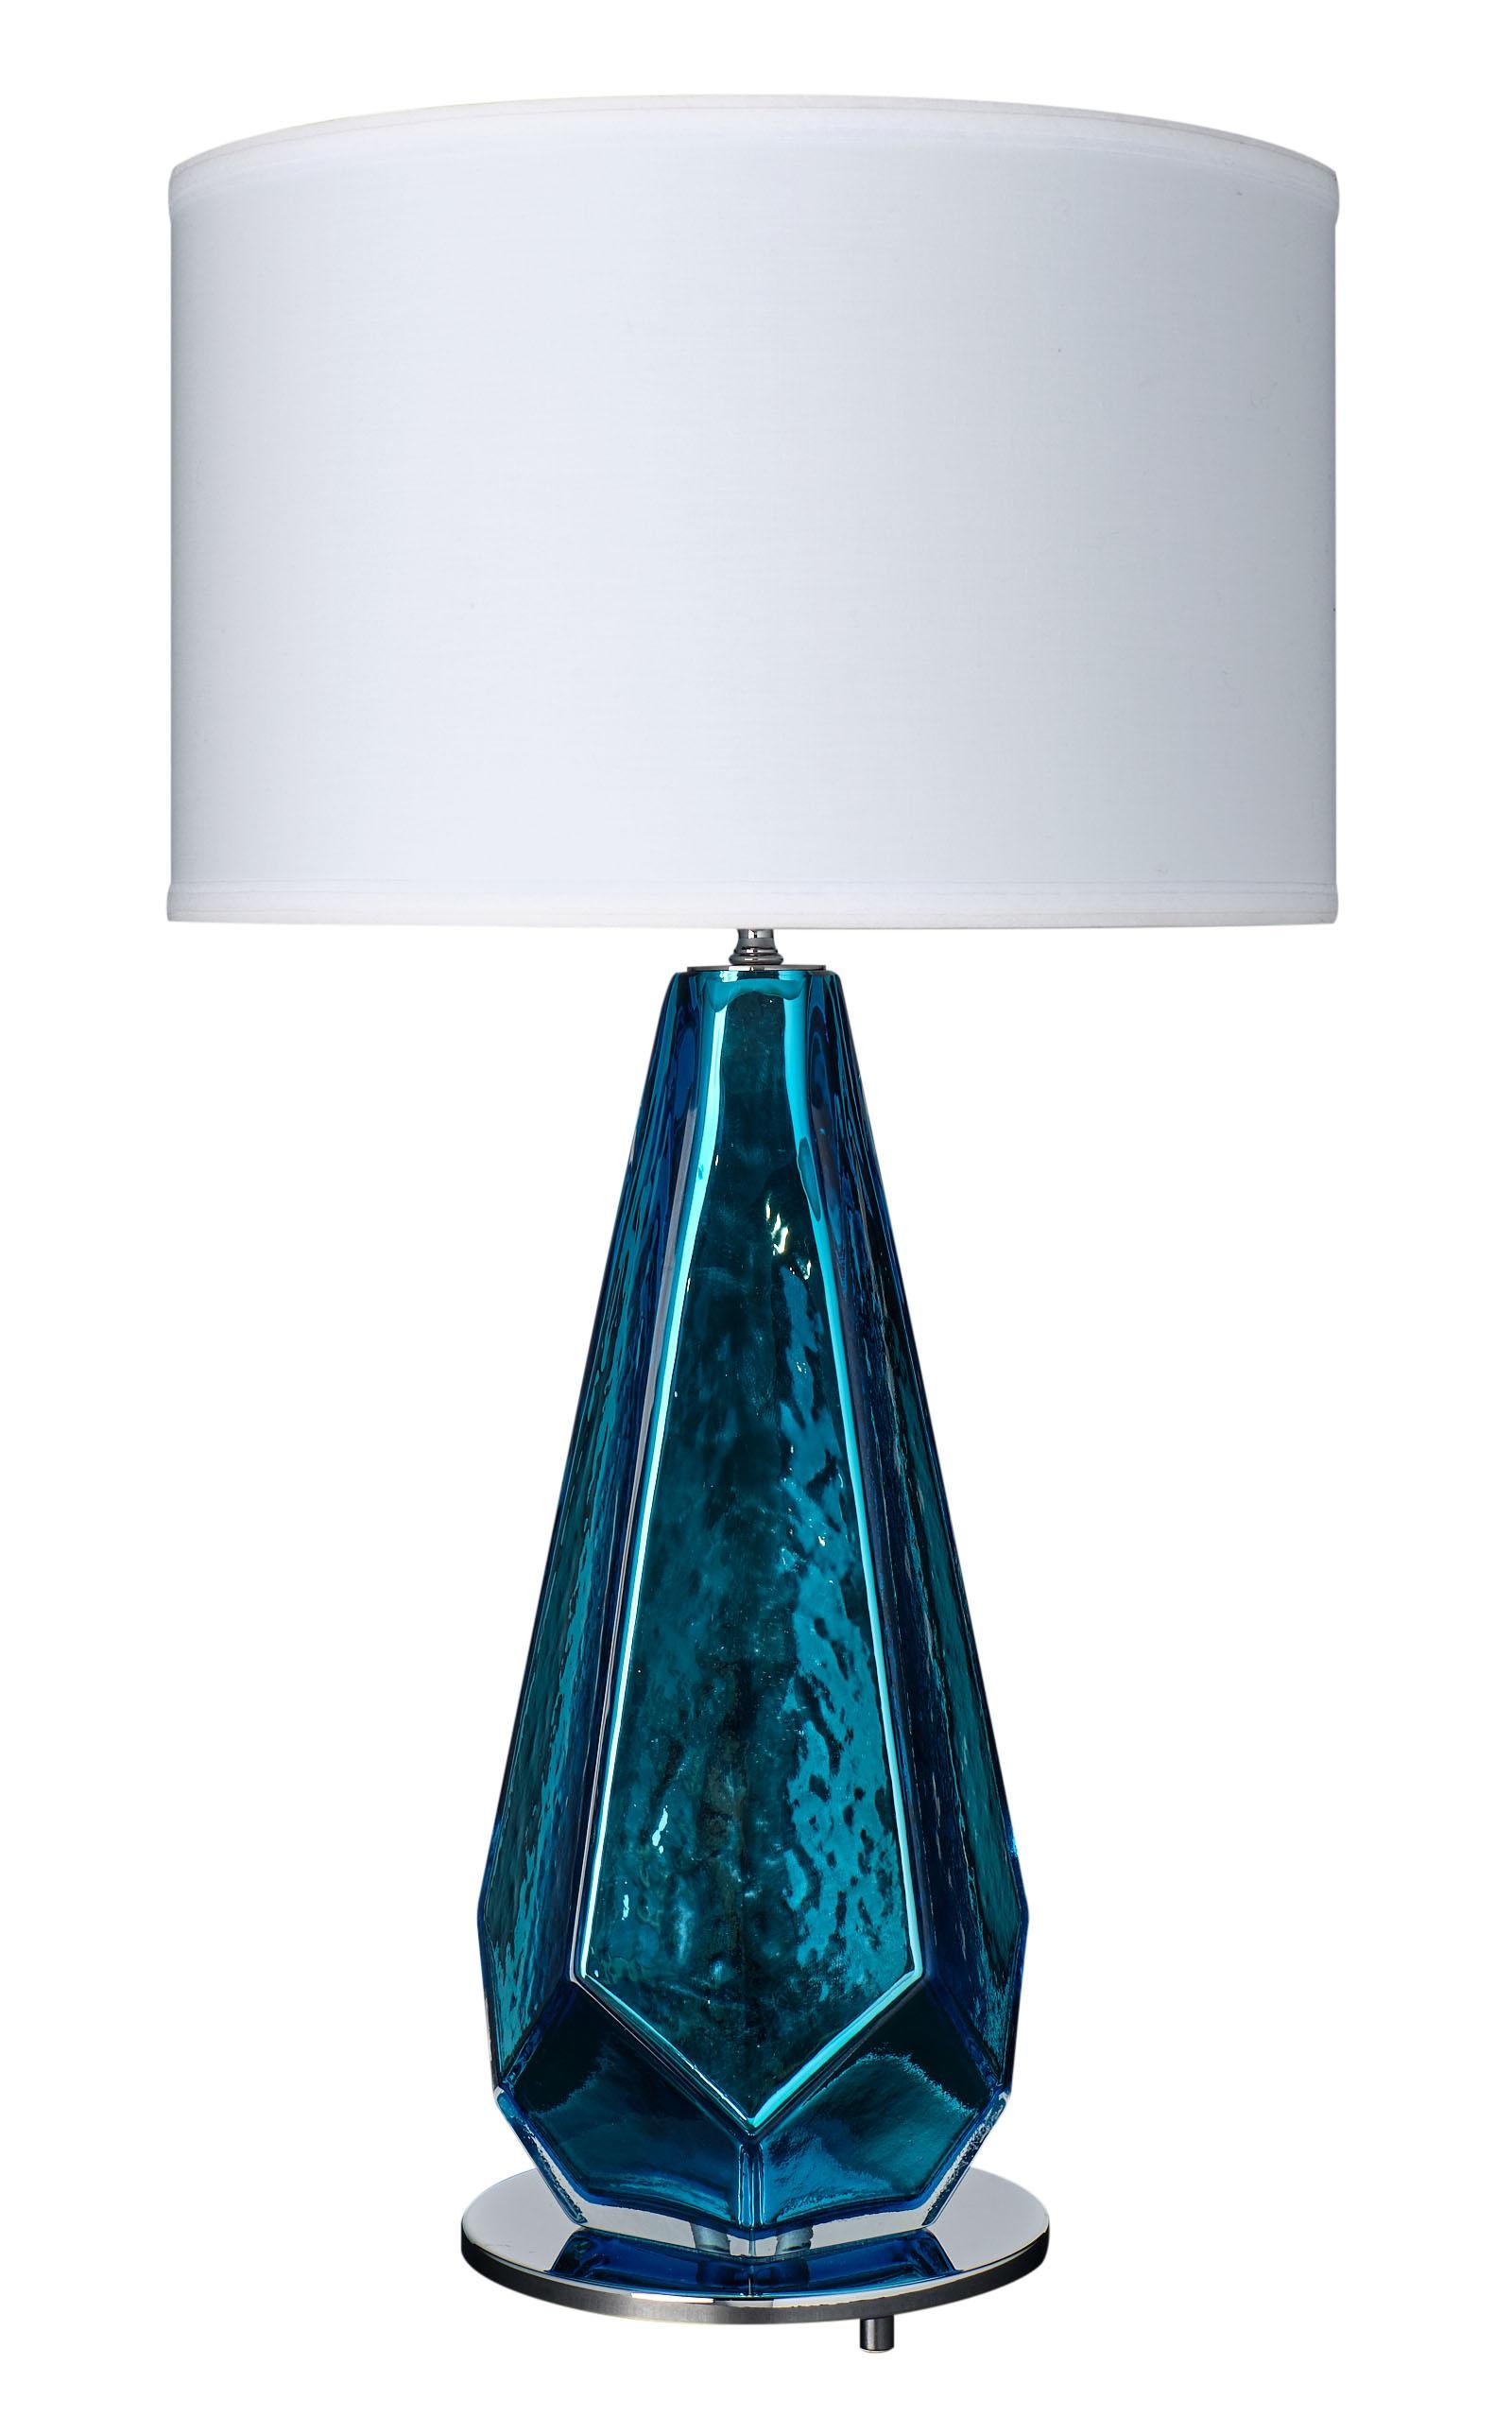 An important pair of blue “specchiate” Murano glass lamps. This mirrored pair has a striking metallic color and impressive shape. They have been newly wired to fit US standards and sit on a chrome finished base.